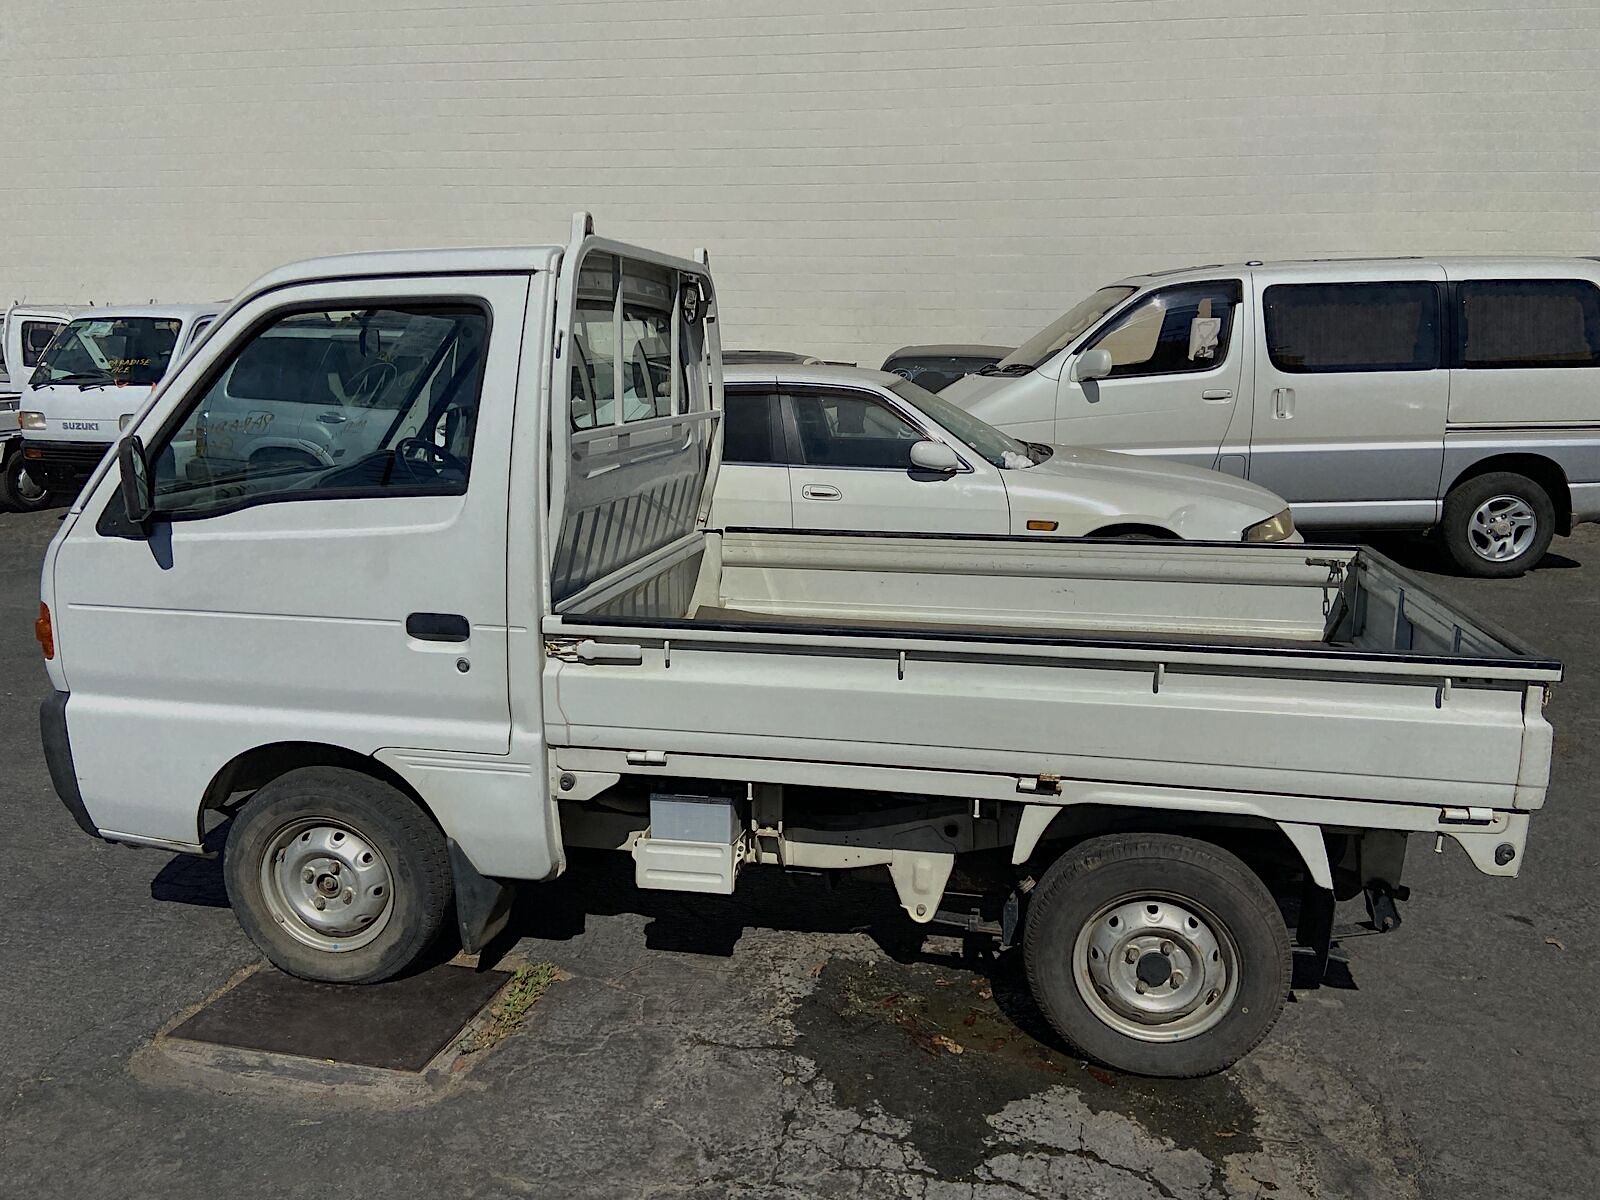 The Suzuki 'Samurai' pickup is the cutest truck you'll see today